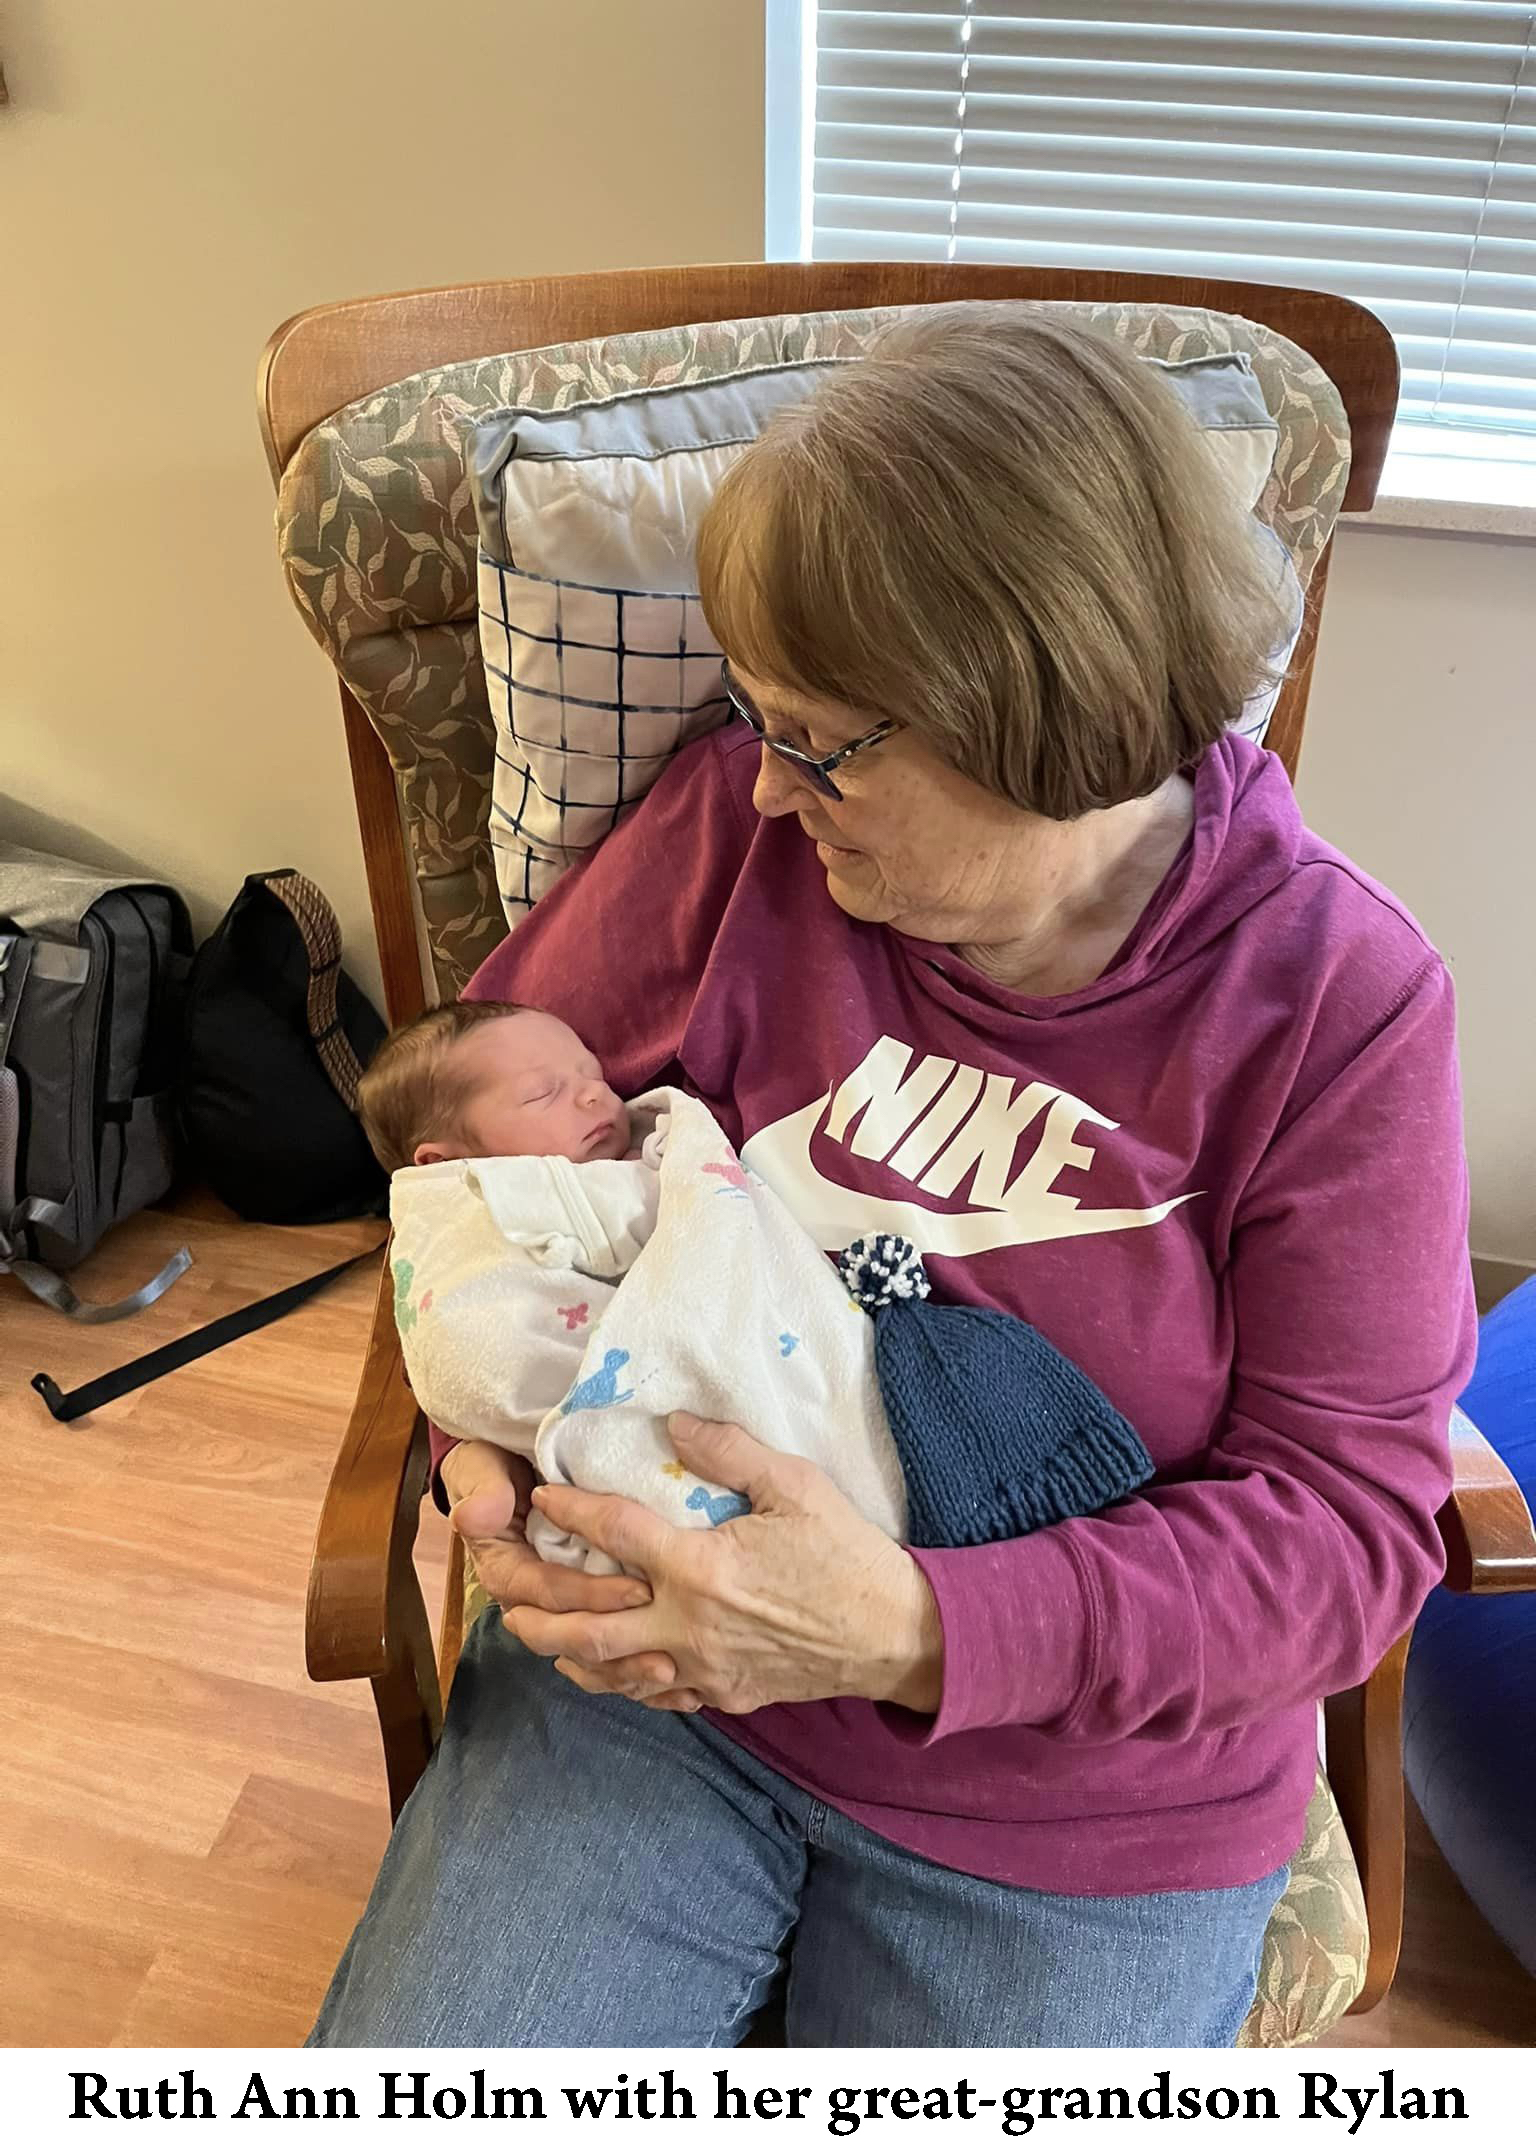 Ruth Ann Holm is holding and looking down on her grea-grandson Rylan Holm